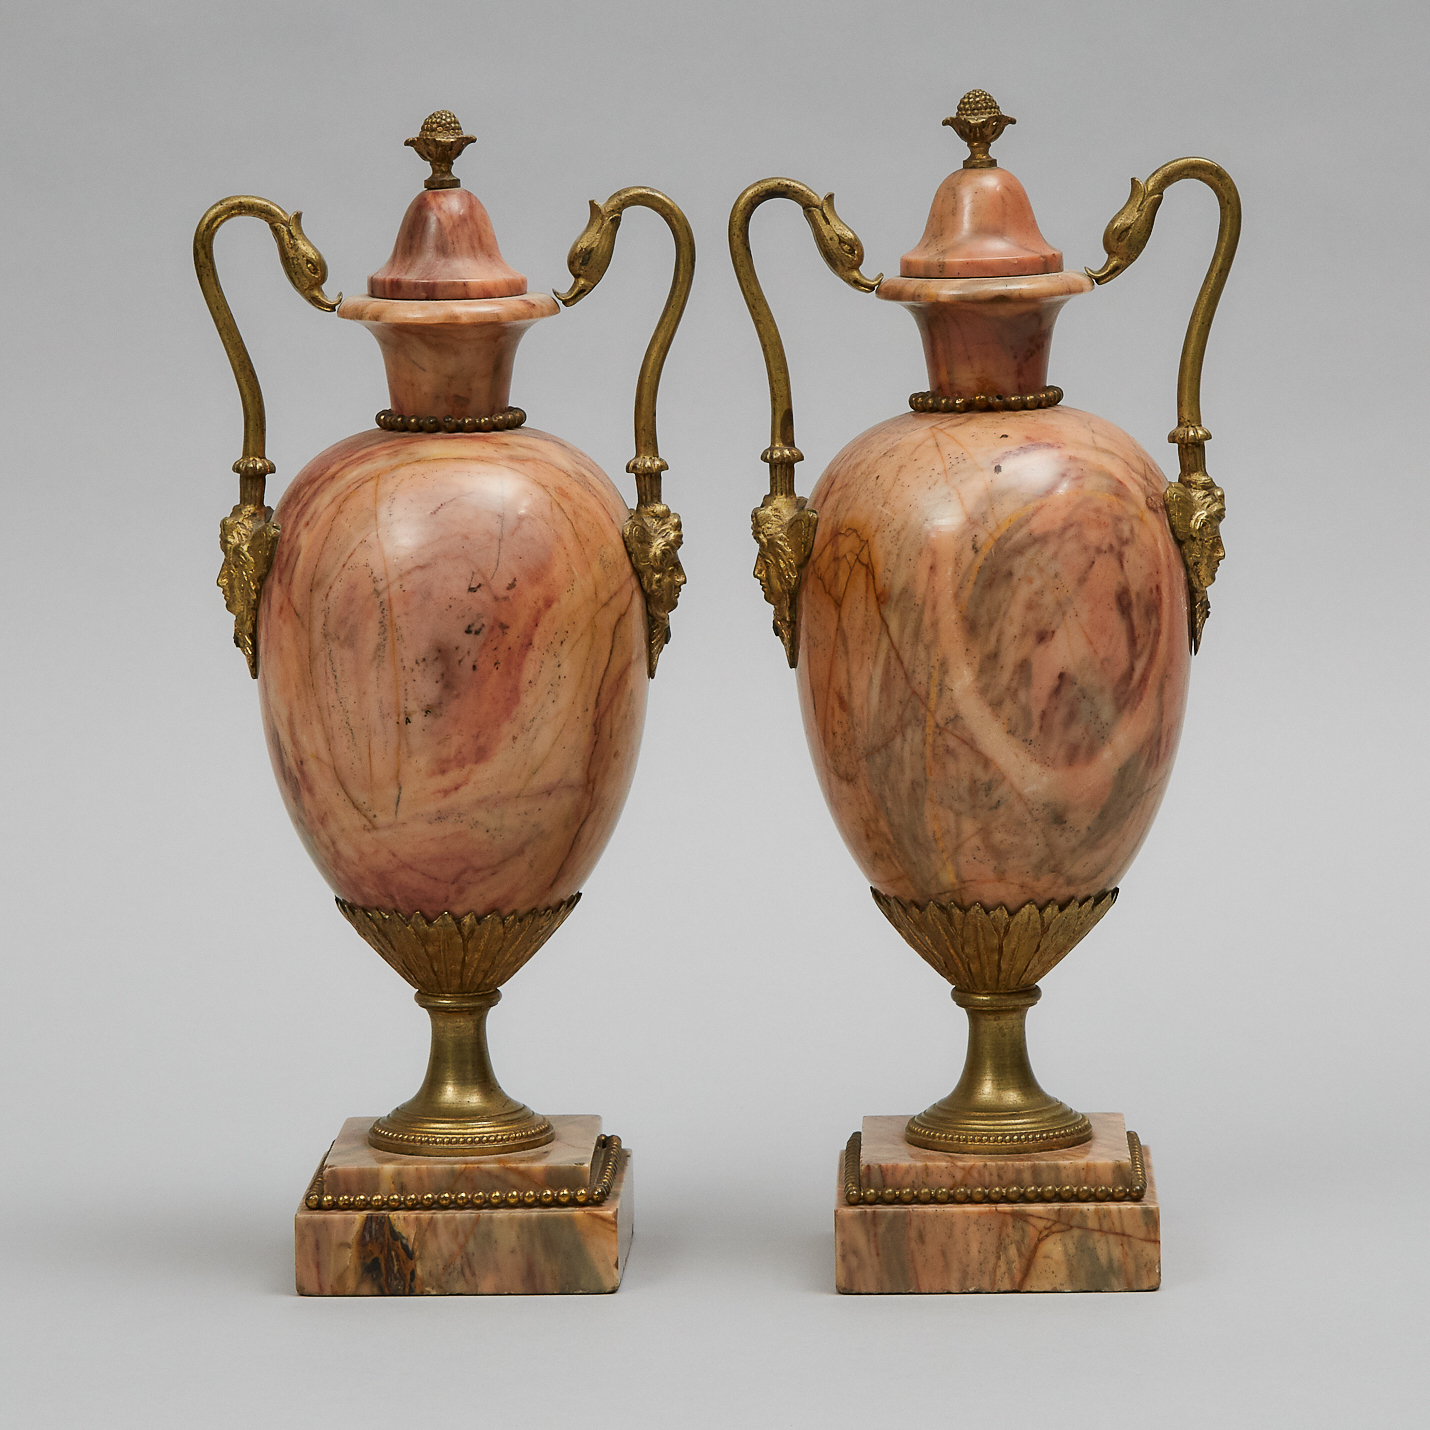 Pair of French Ormolu Mounted Pink Marble Mantel Urns, c.1900